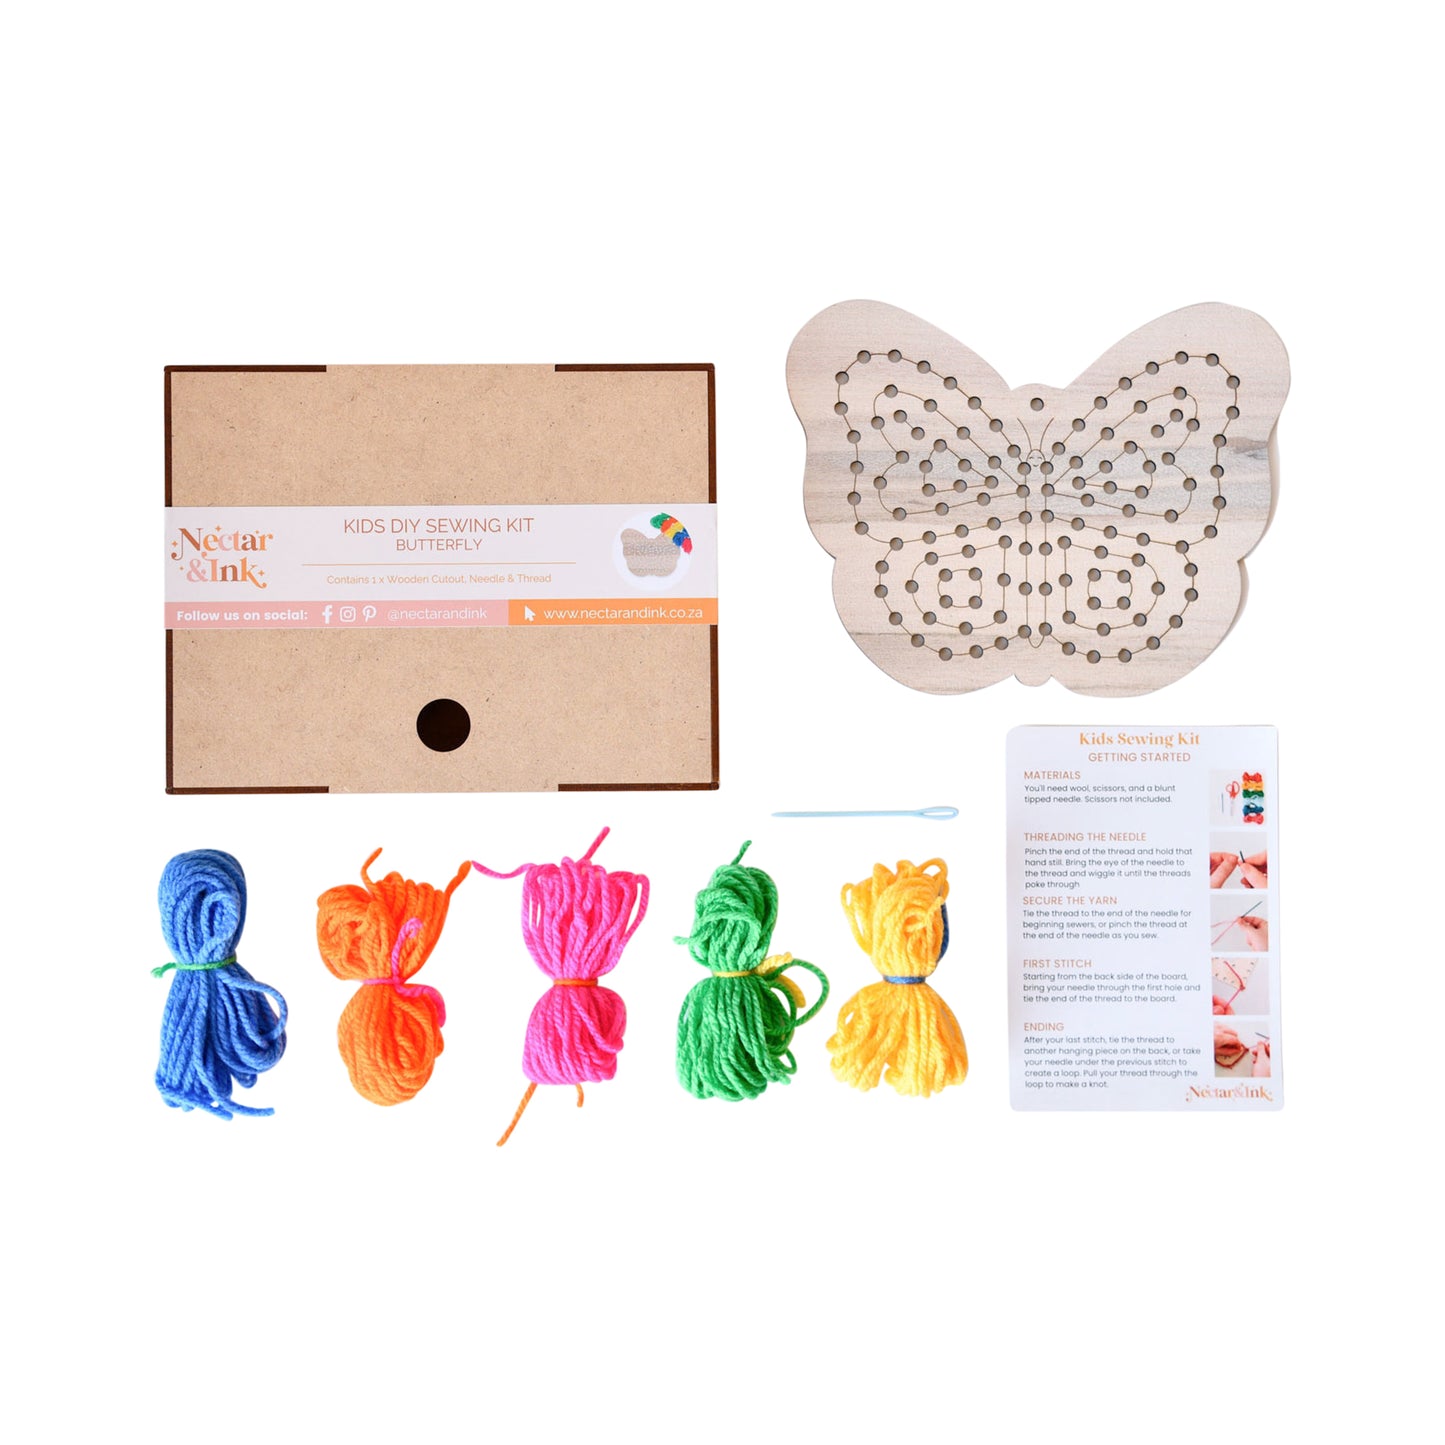 Butterfly Sewing Craft Kit - Encourages Creativity and Motor Skills in Kids!